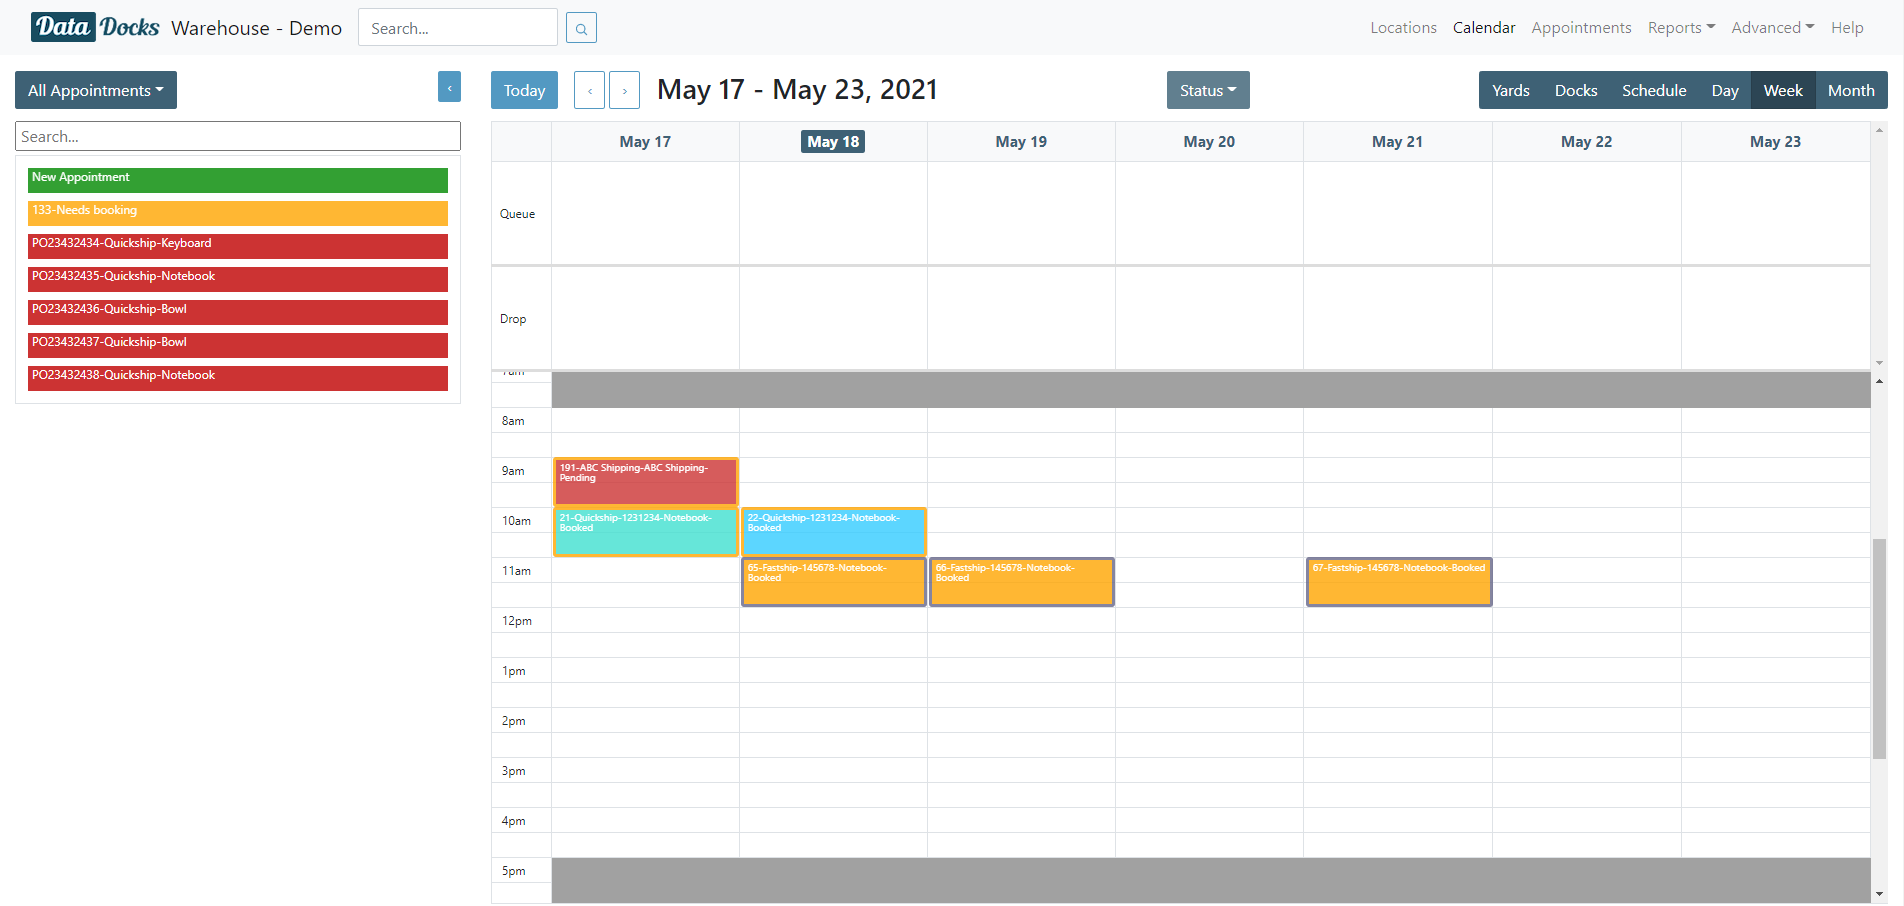 Landing page of DataDocks, your calendar view. From here you can view, edit or create appointments.